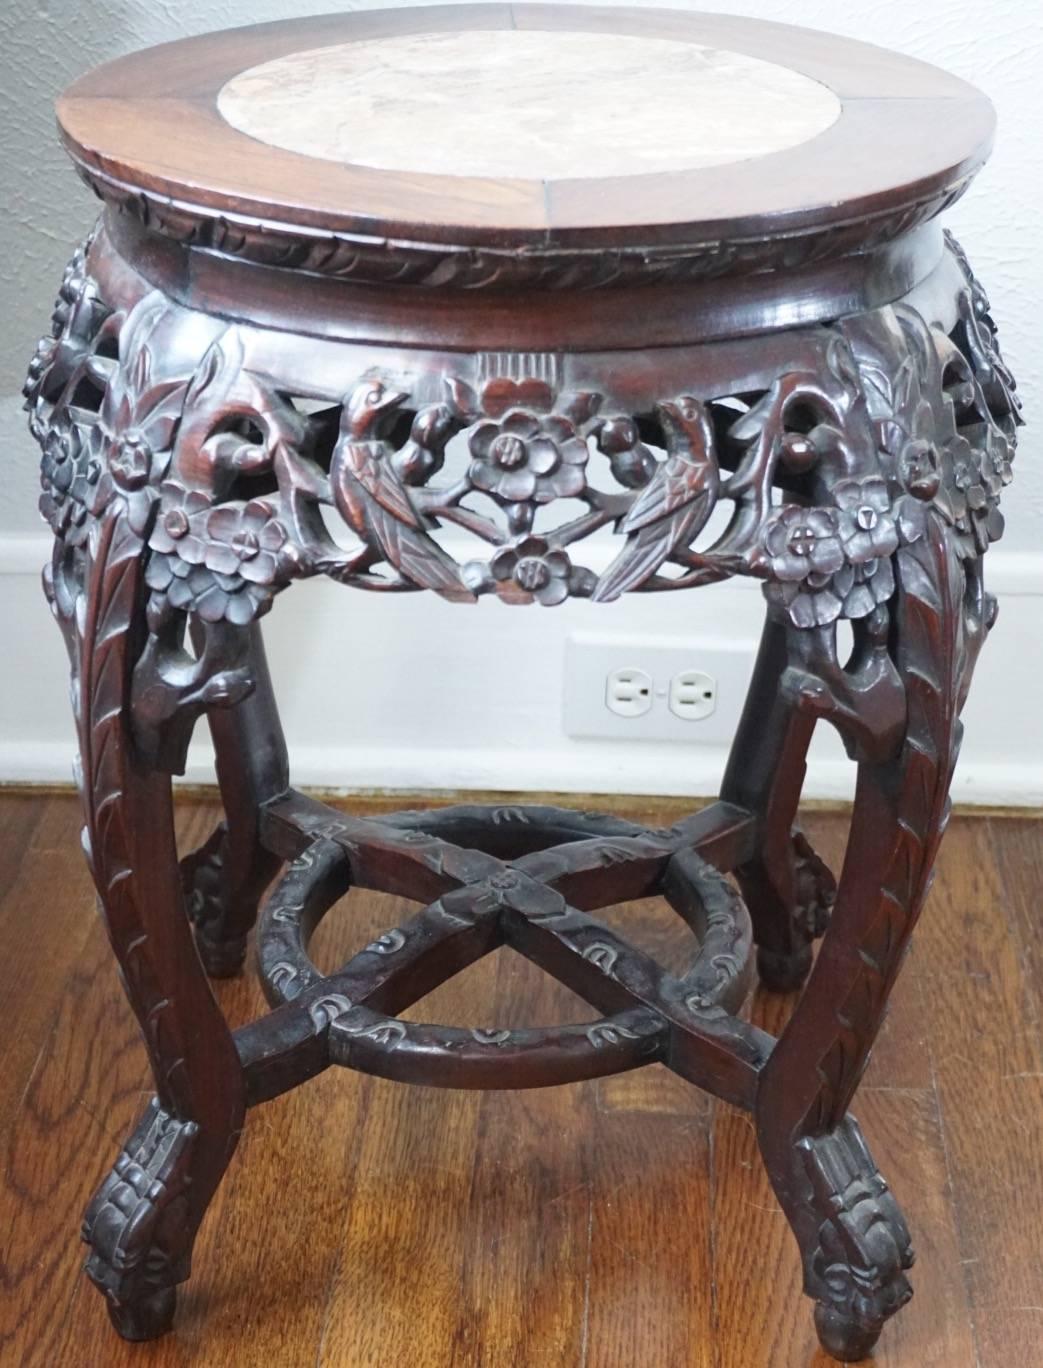 19th century Chinese rosewood and marble carved stand with motifs of birds, flowers and branches.

Measures: Height 20.5 inches,
width 18 inches.

AVANTIQUES is dedicated to providing an exclusive curated collection of Fine Arts, Paintings, Bronzes,